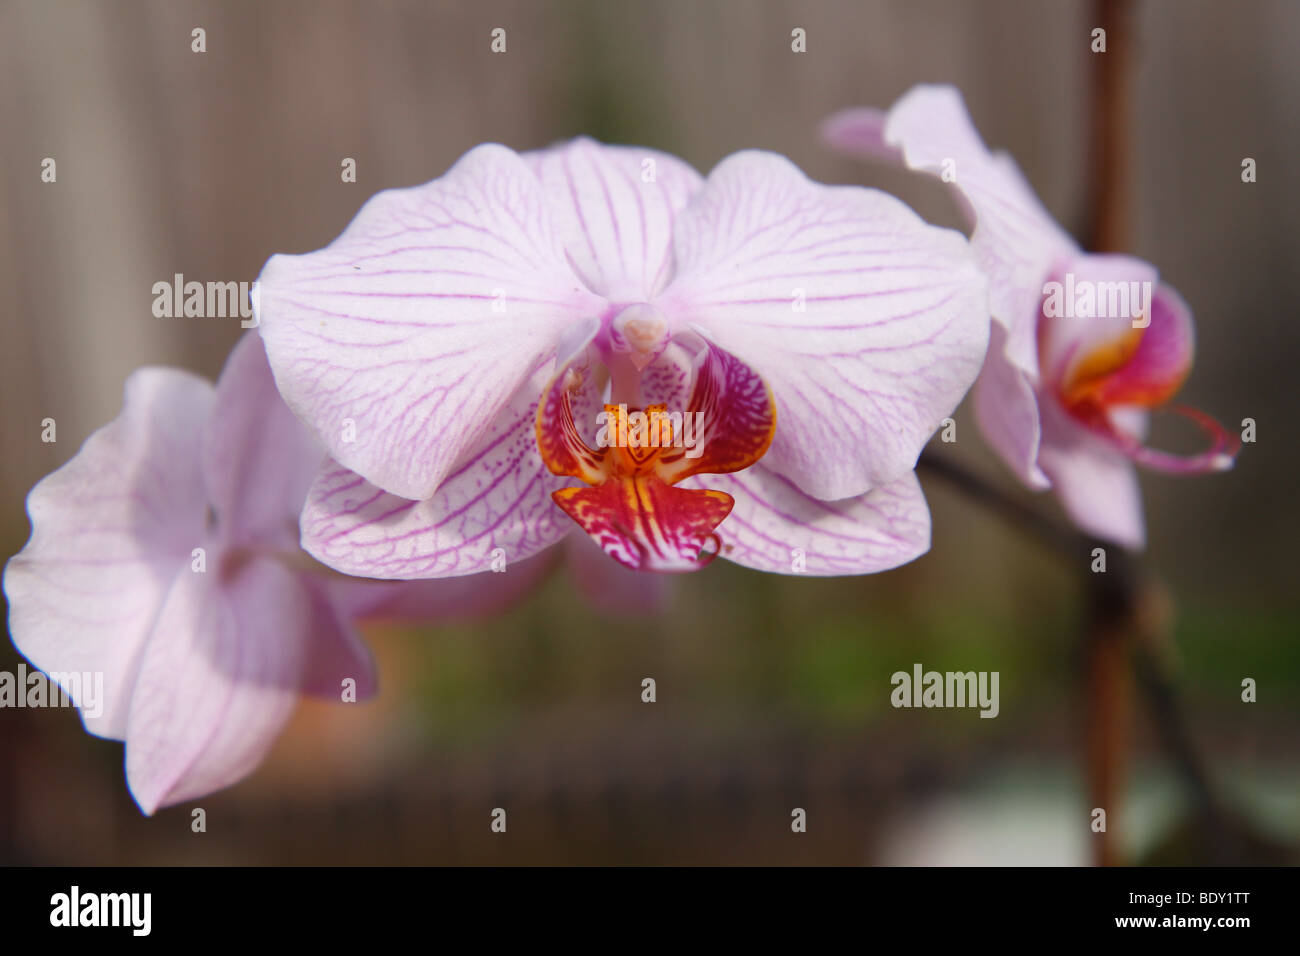 Closeup of an Orchid flower head Stock Photo